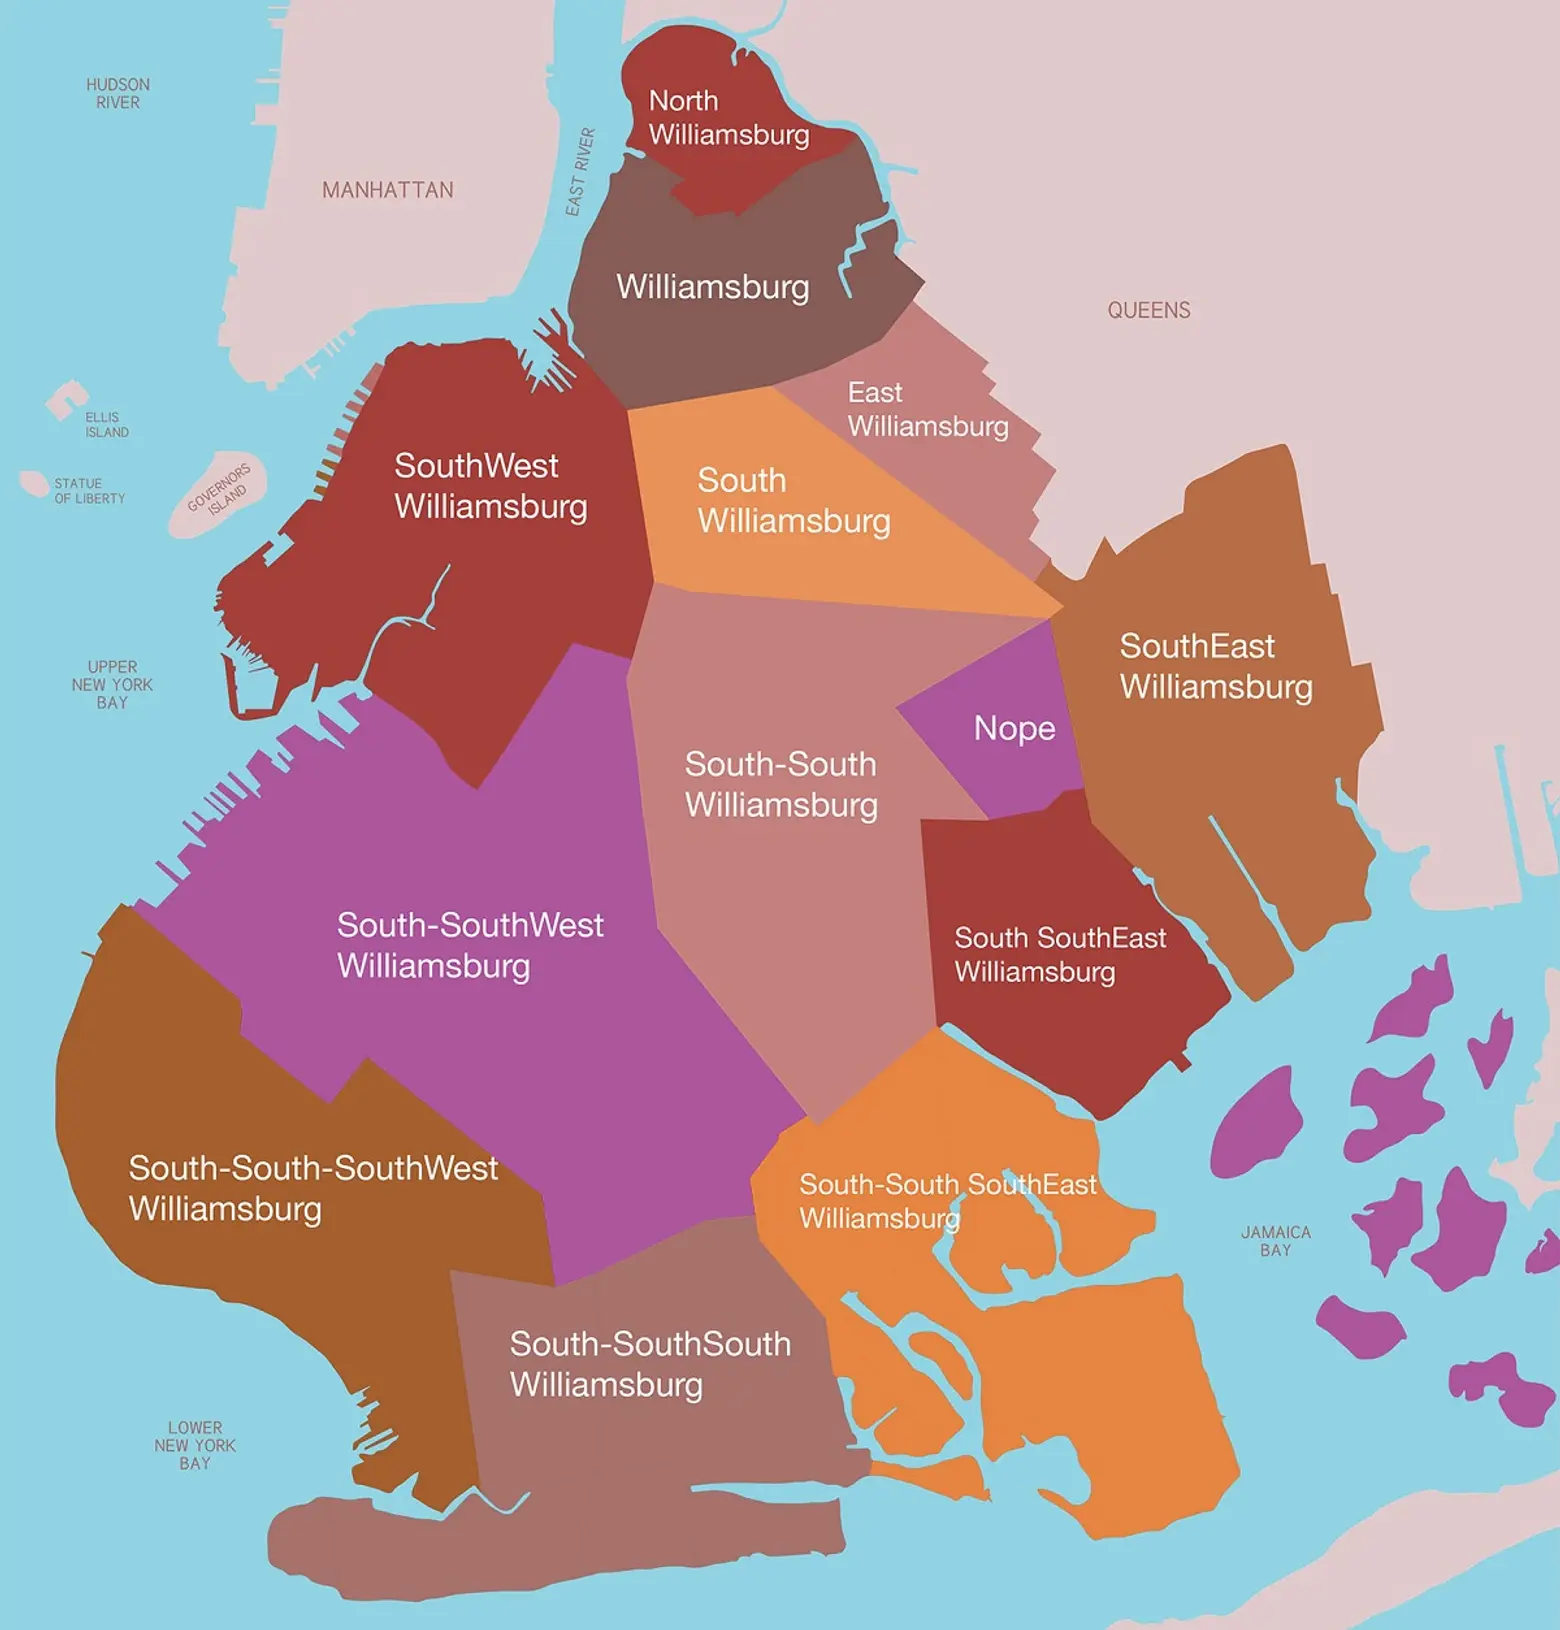 According to Real Estate Brokers, All of Brooklyn Is an Extension of Williamsburg